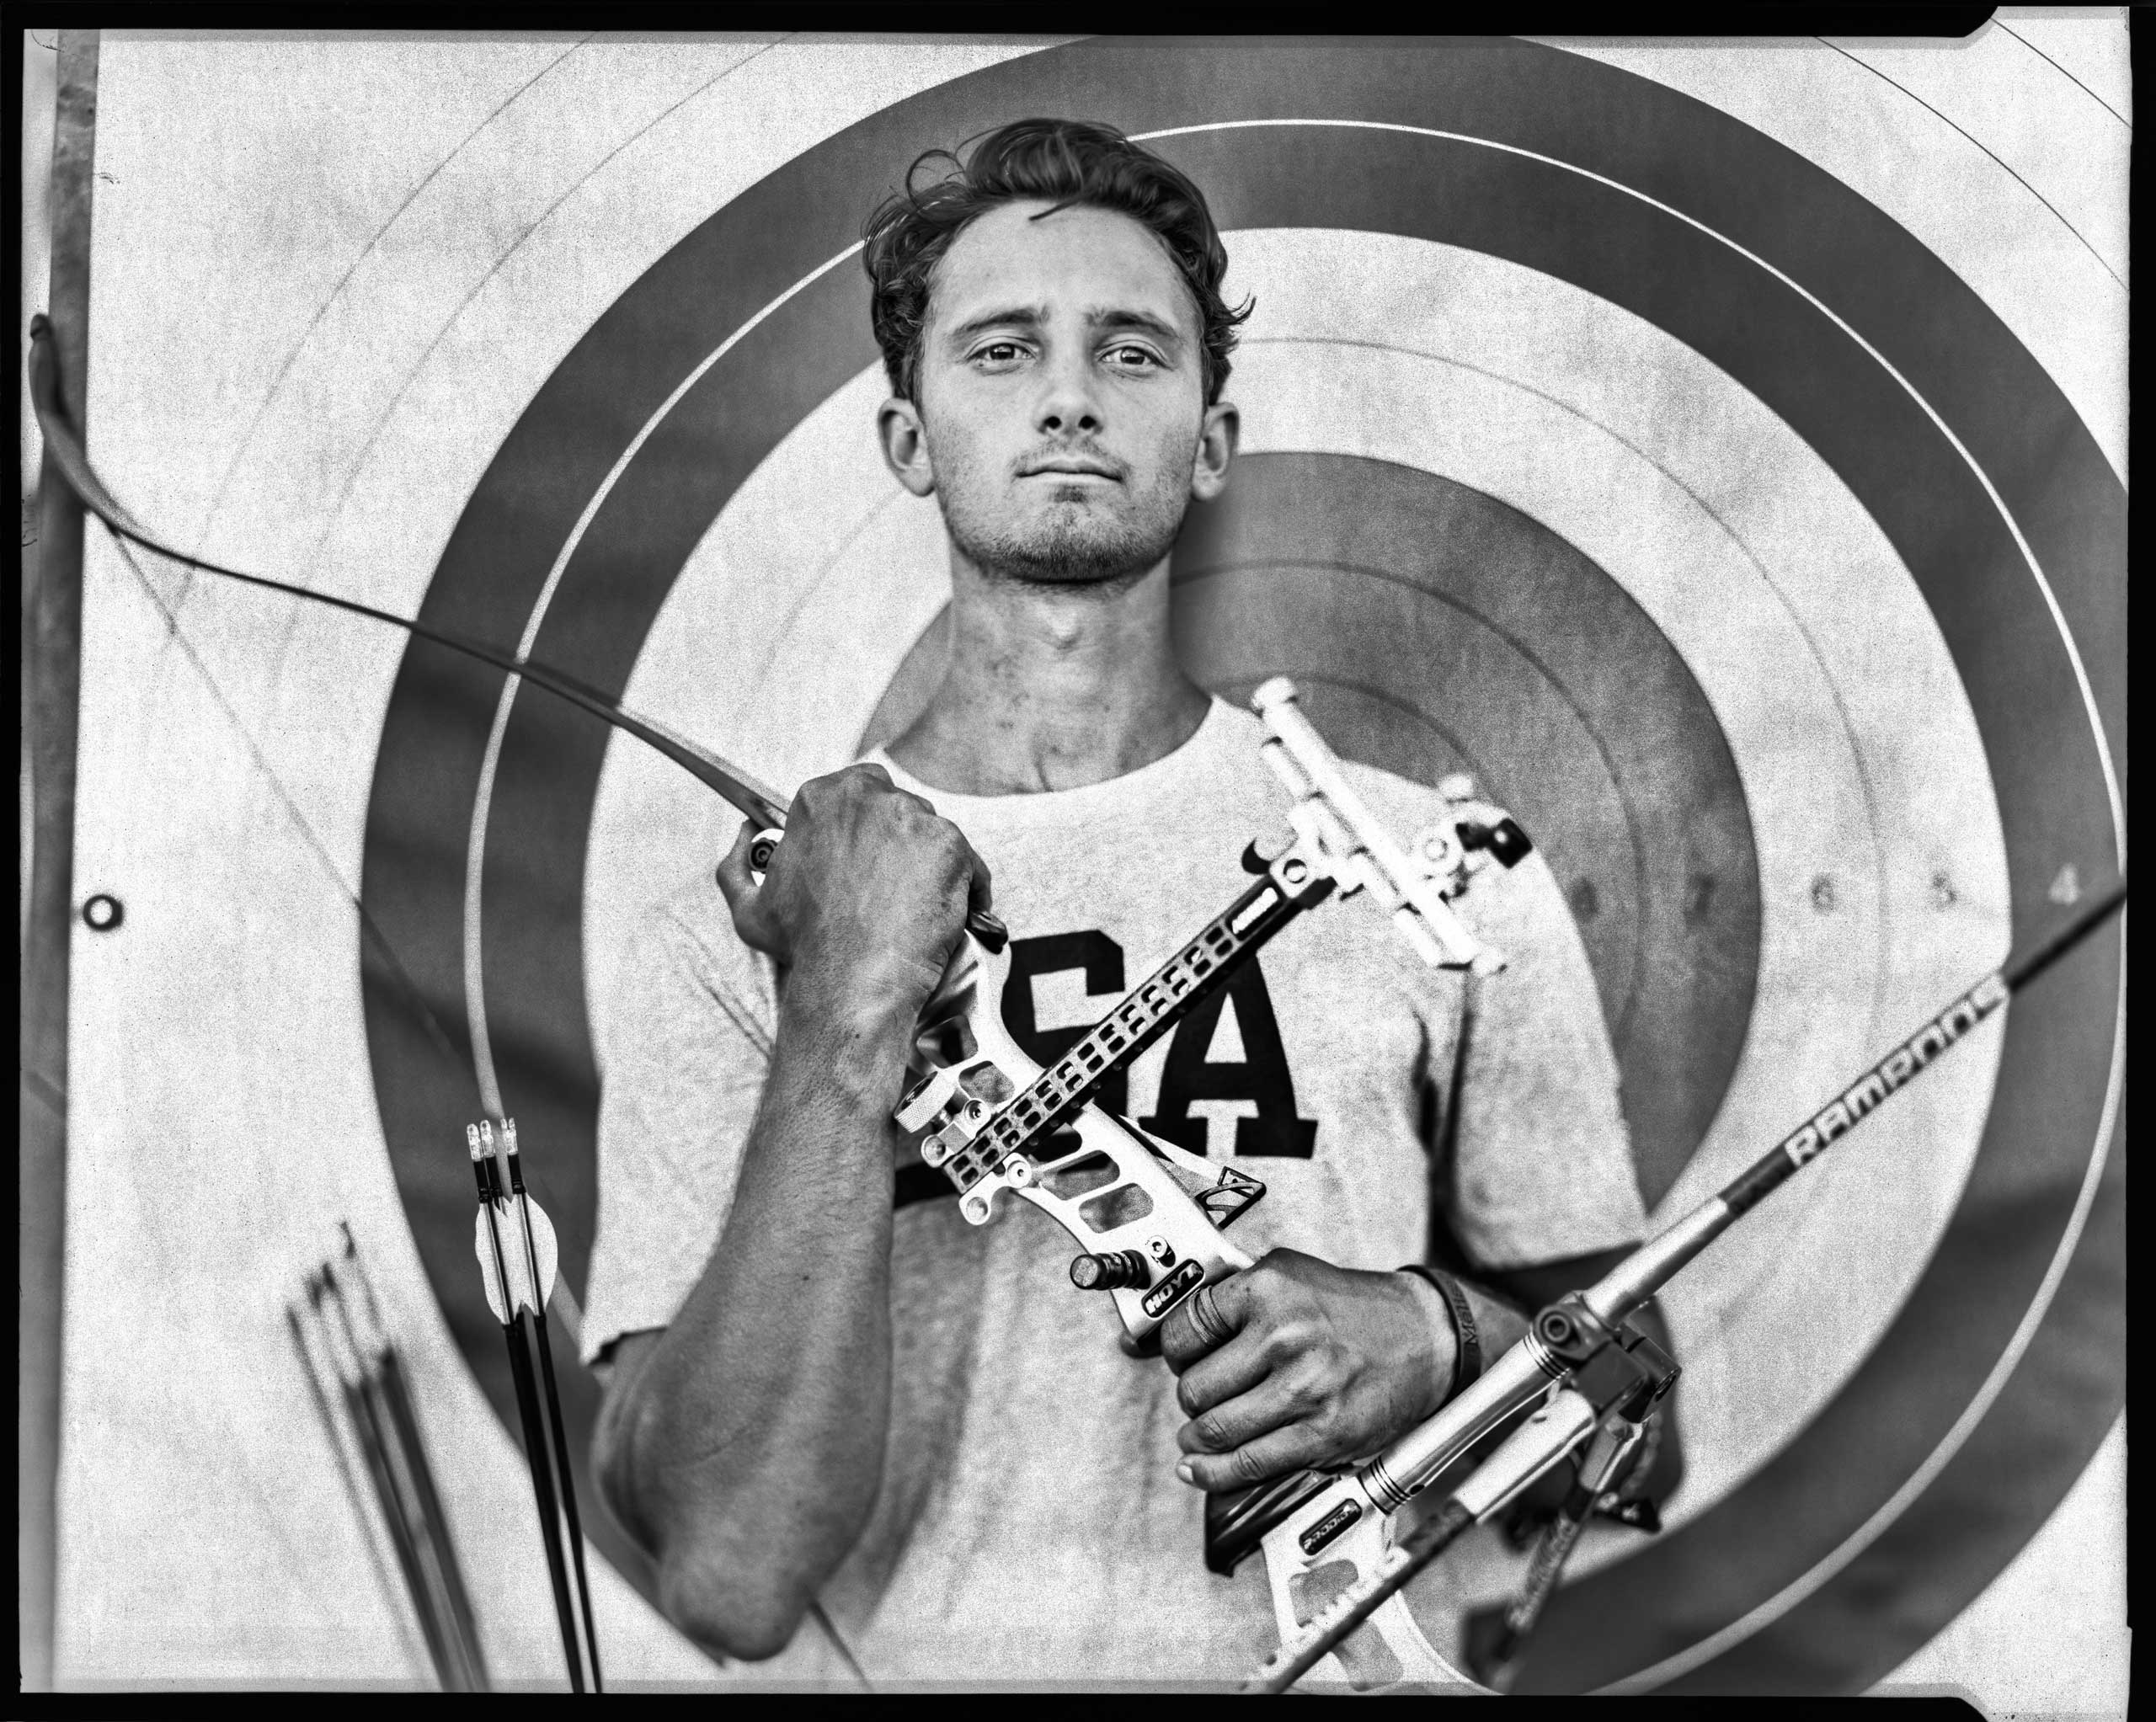 Zach Garrett will be part of the US archery team at the 2016 Rio Olympics and is photographed at the Olympic Training Center in Chula Vista, Calif. This is Garrett's first Olympics.